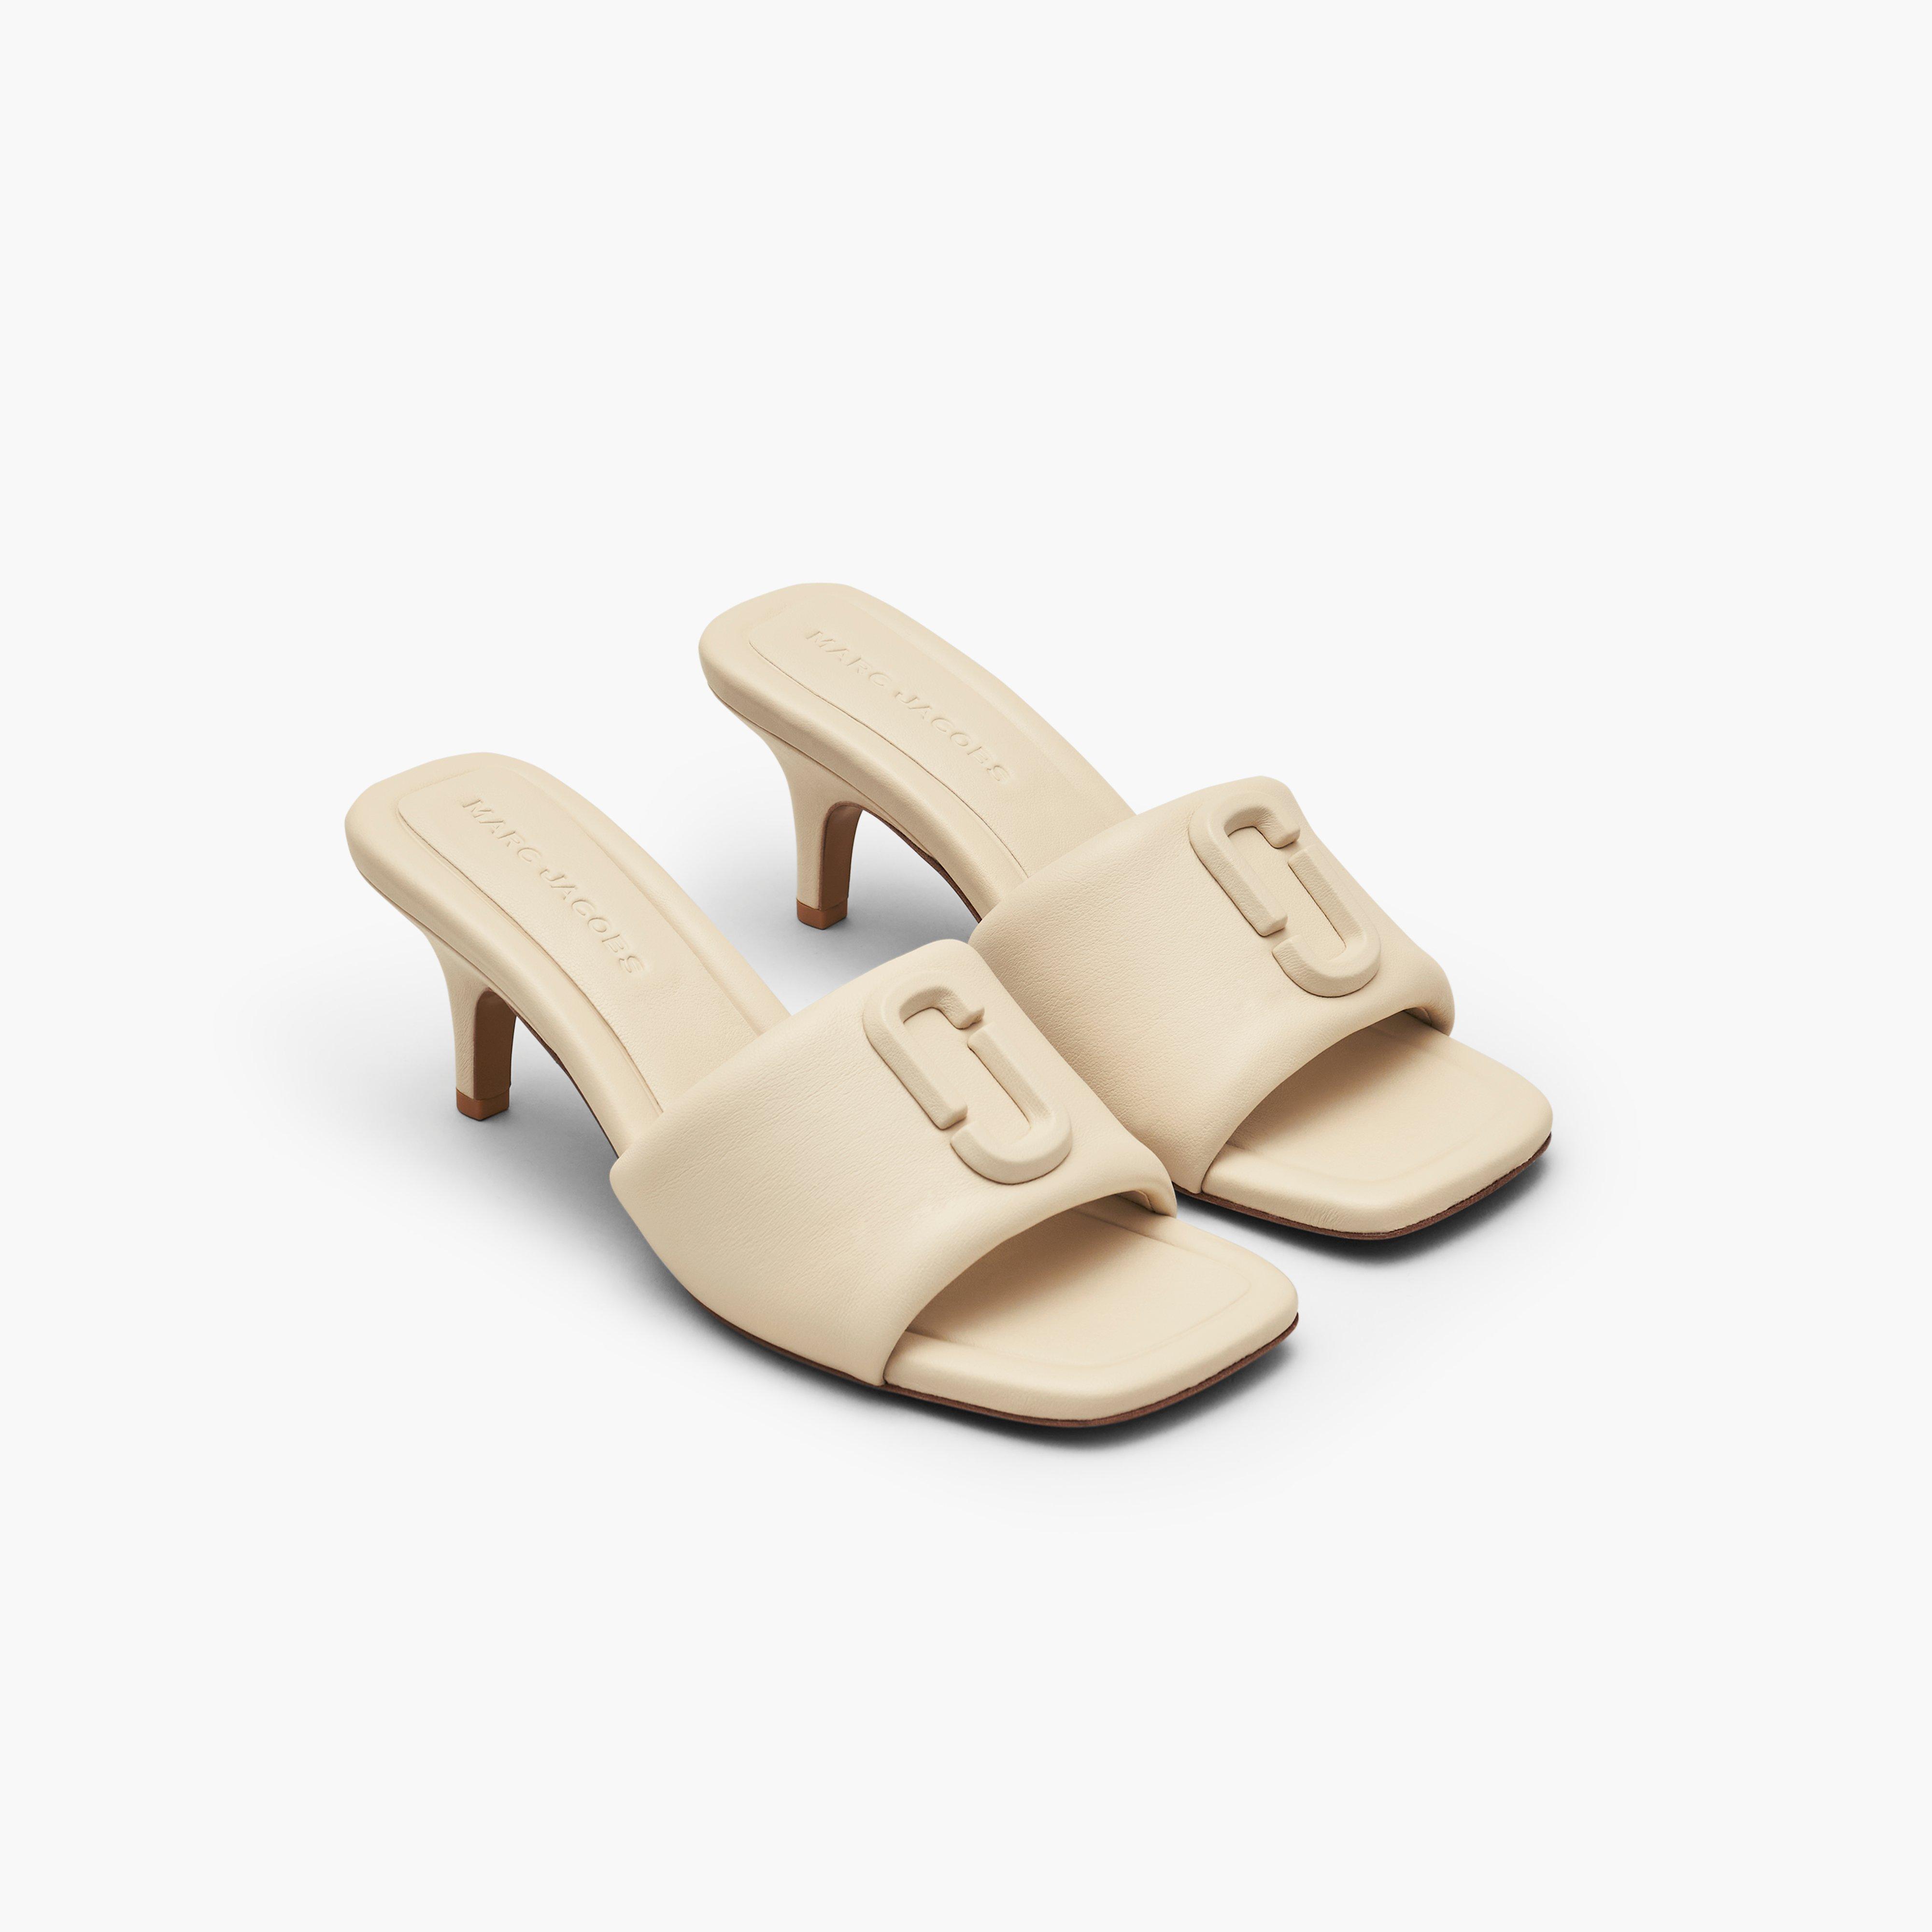 Marc by Marc jacobs The Leather J Marc Heeled Sandal,CLOUD WHITE